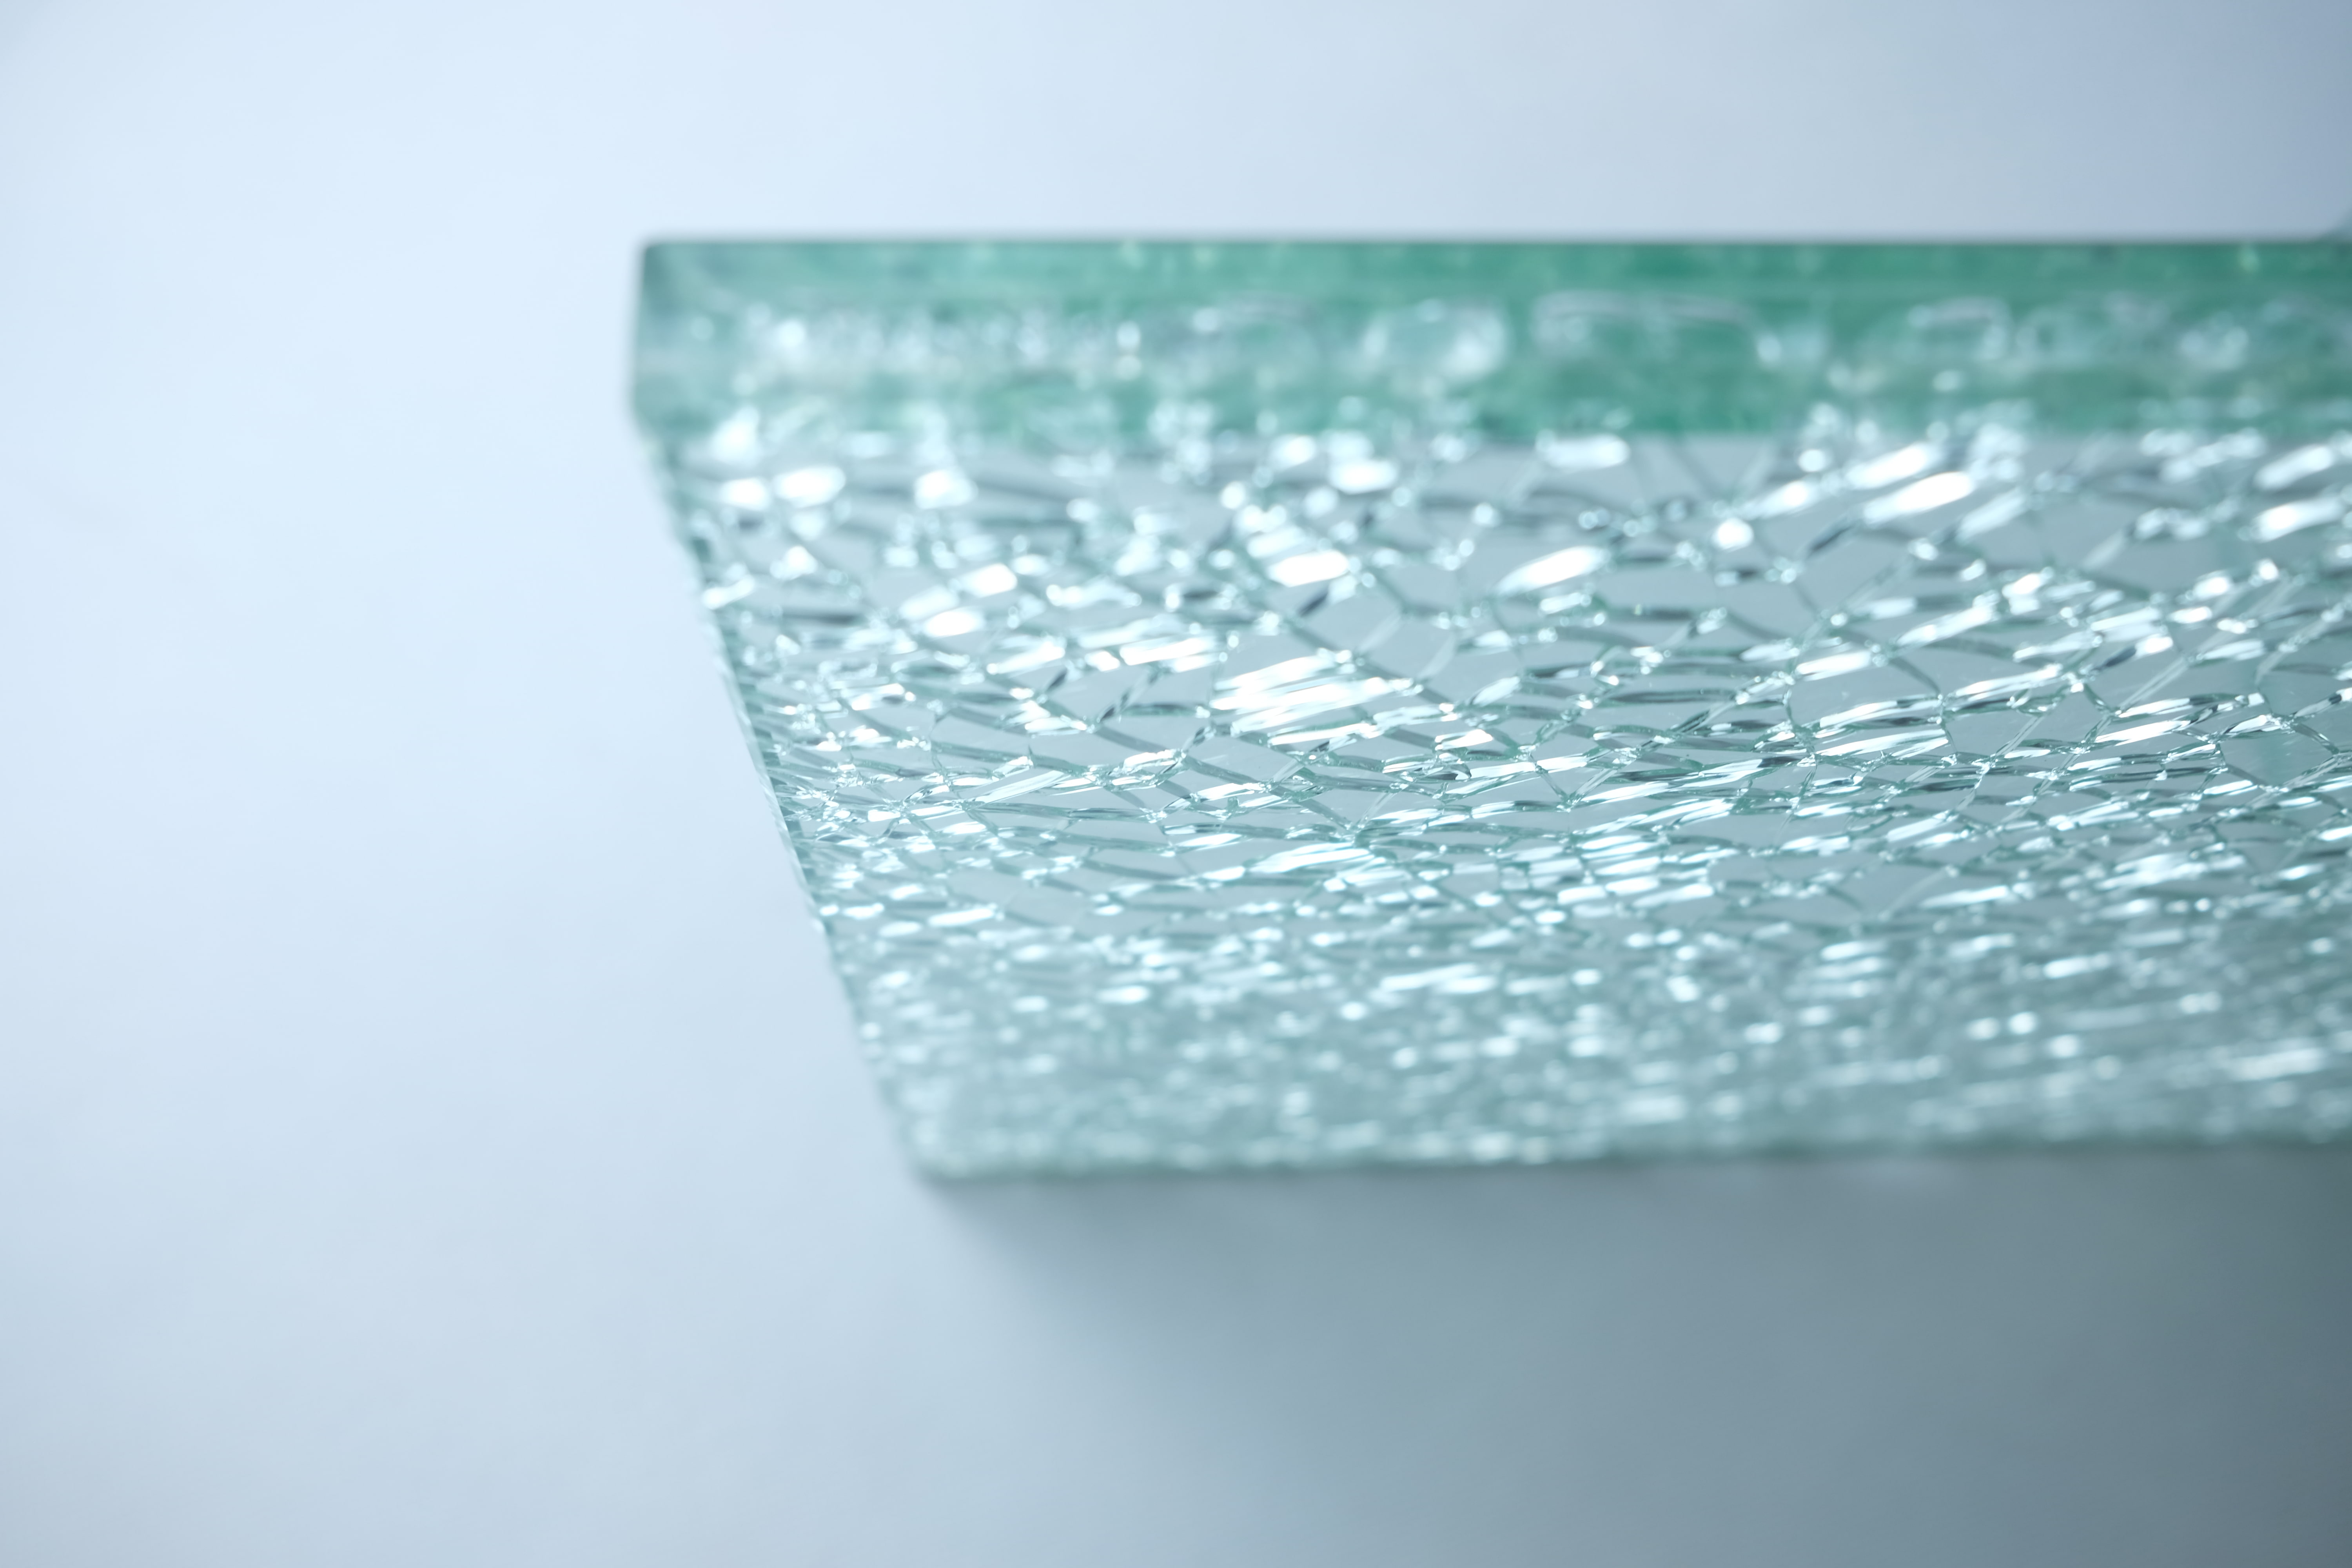 Crackle glass